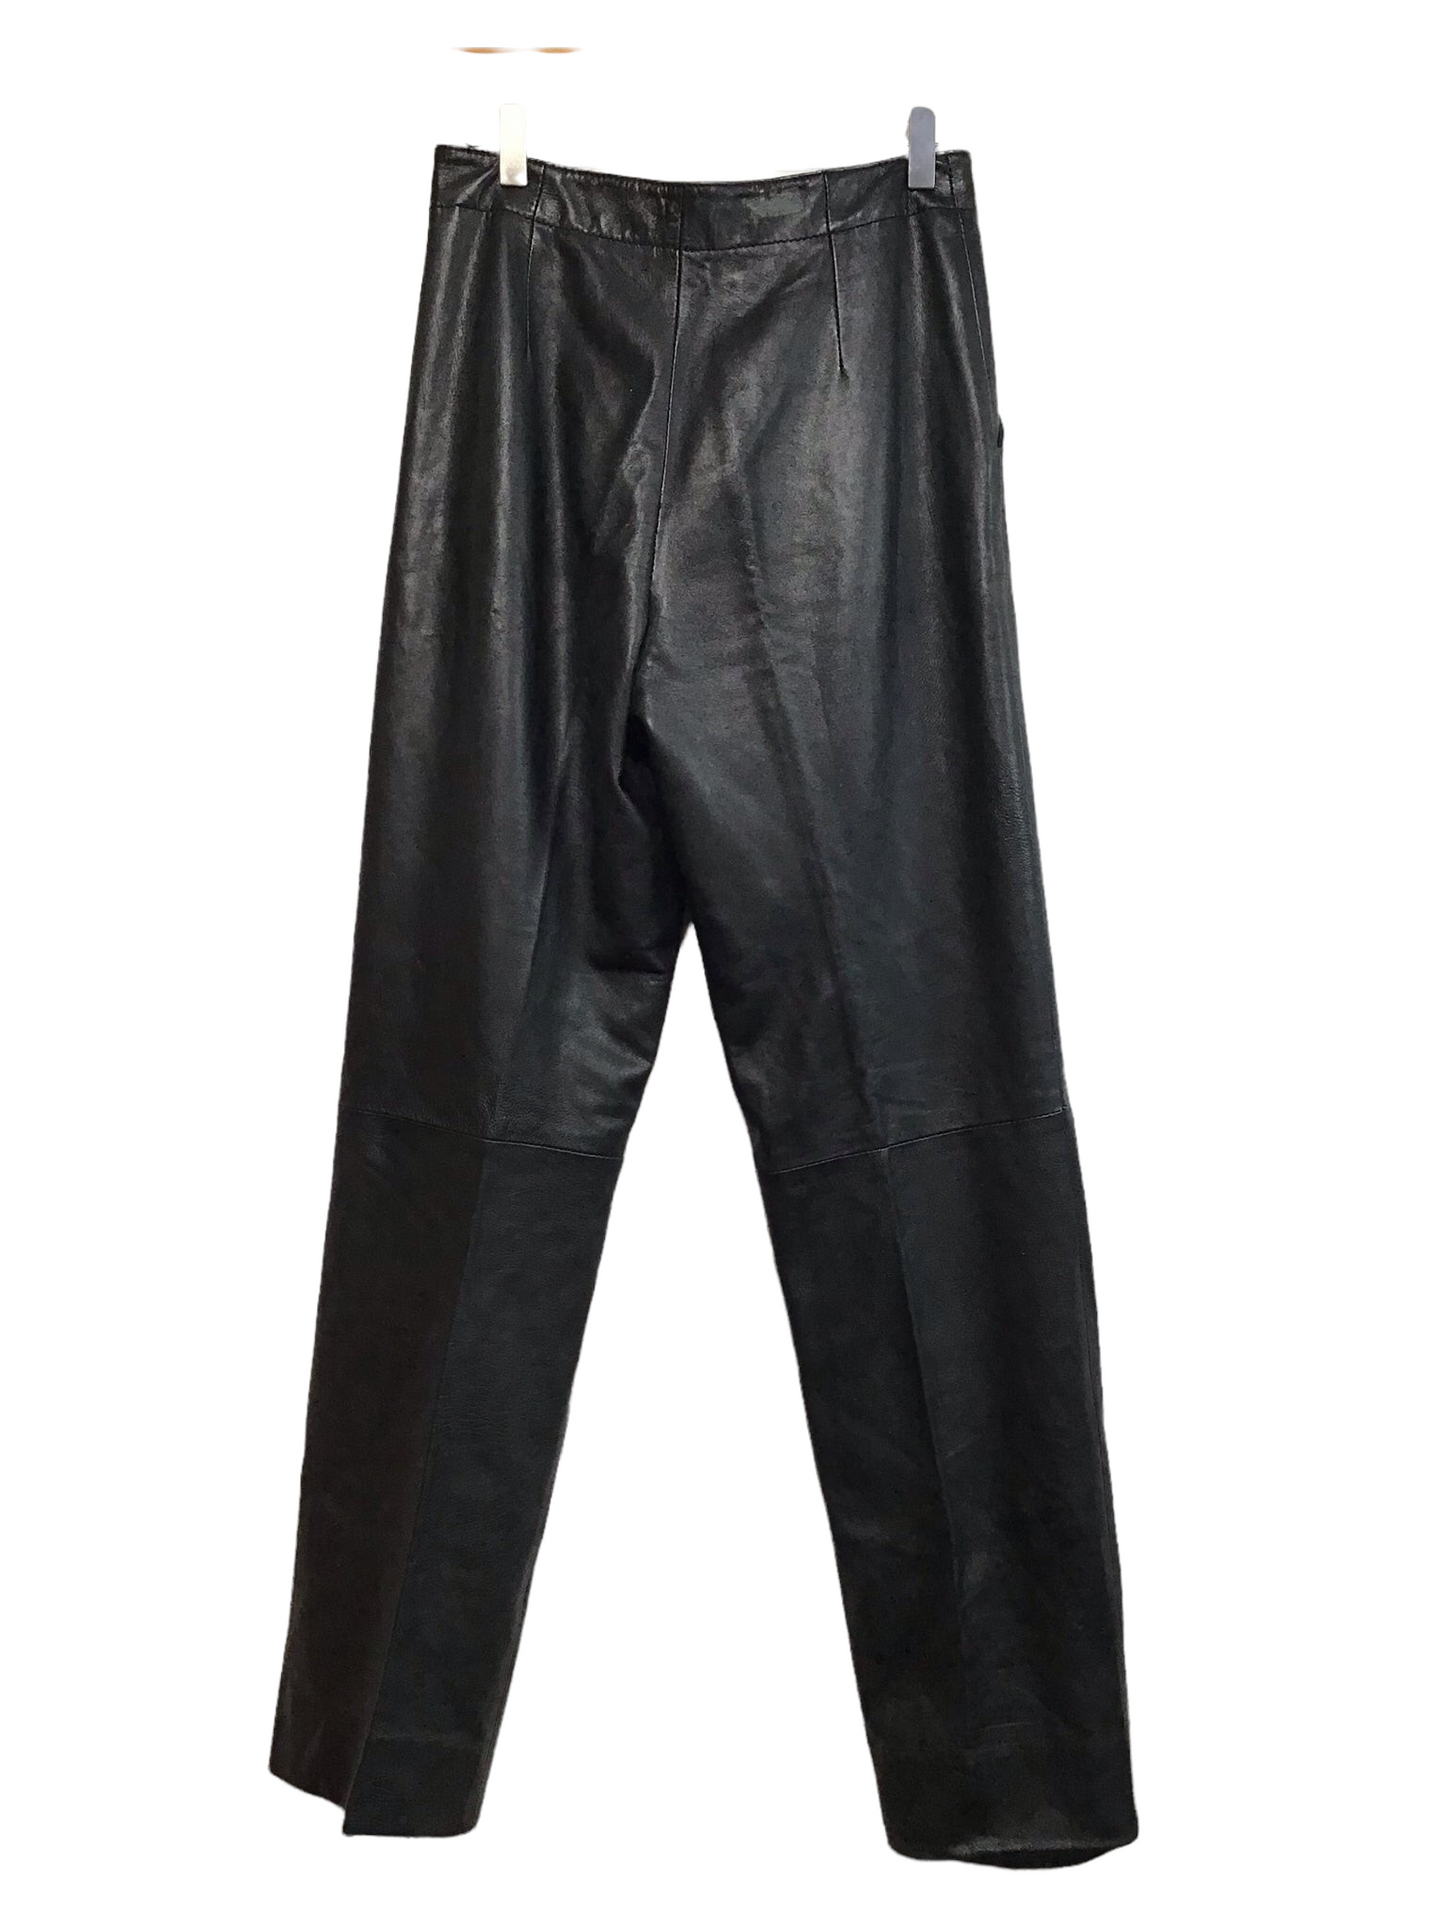 Leather Peg Trousers (28”)